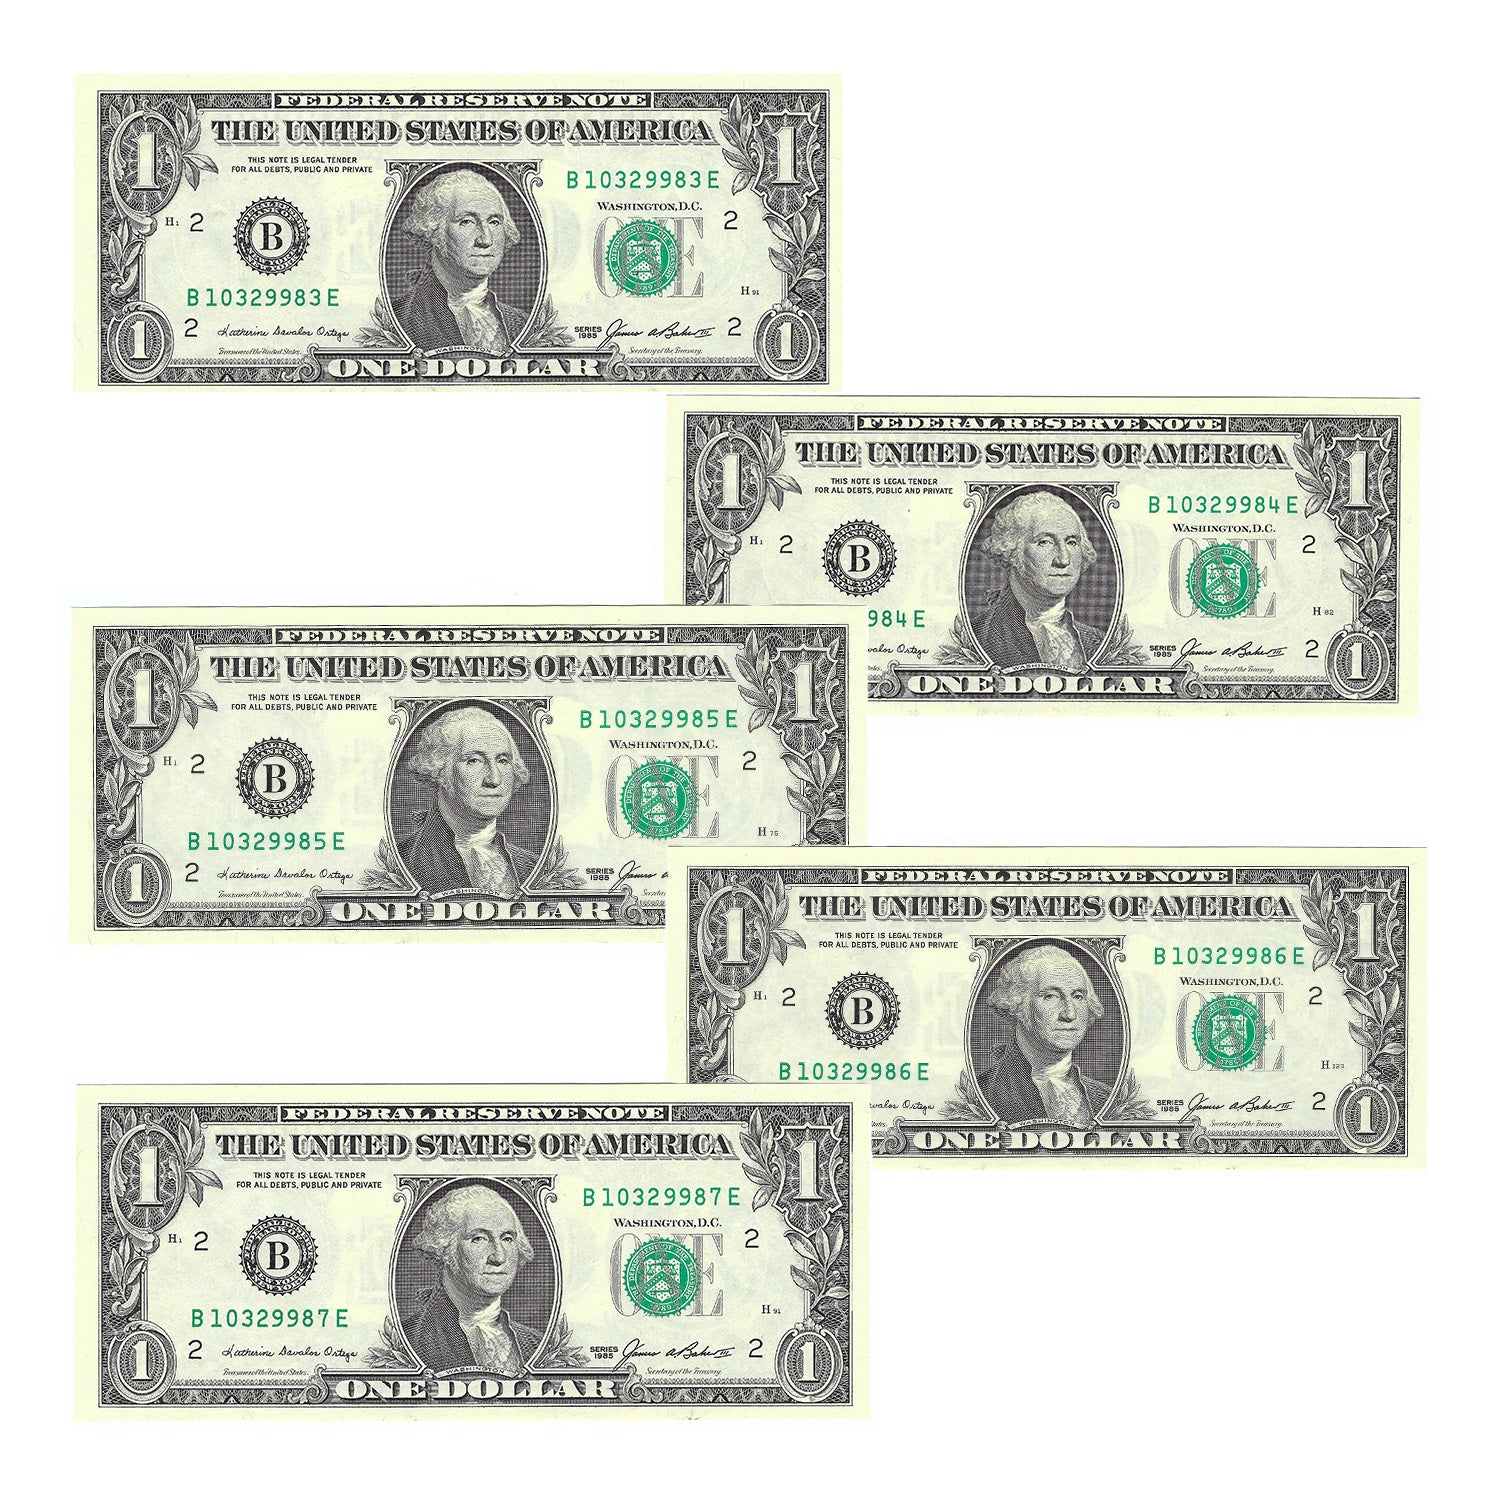 1985 $1 U.S. Federal Reserve Notes // Set of 5 Sequential Serial Numbers // Choice Crisp Uncirculated